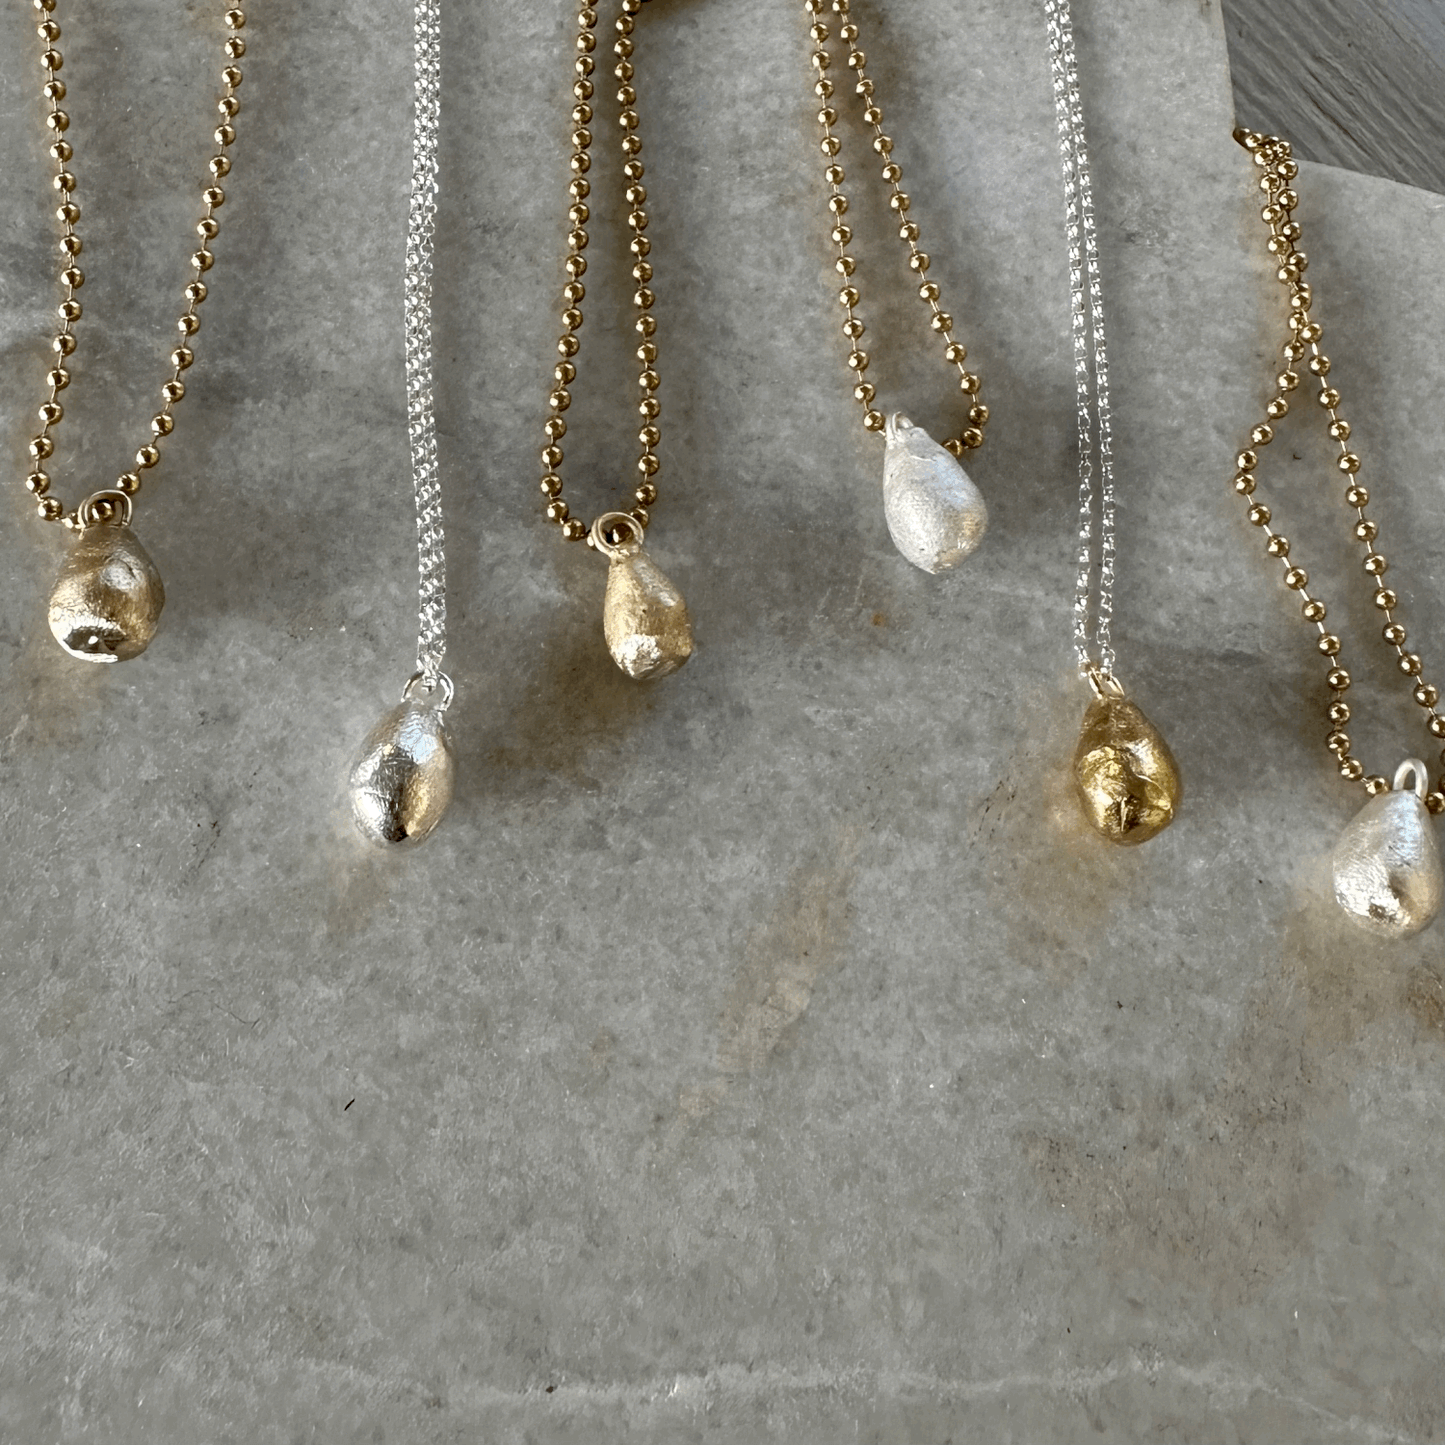 Pearly Dew Drop Necklace: A sweet little drop of solid recycled brass, or silver, on a recycled silver chain.